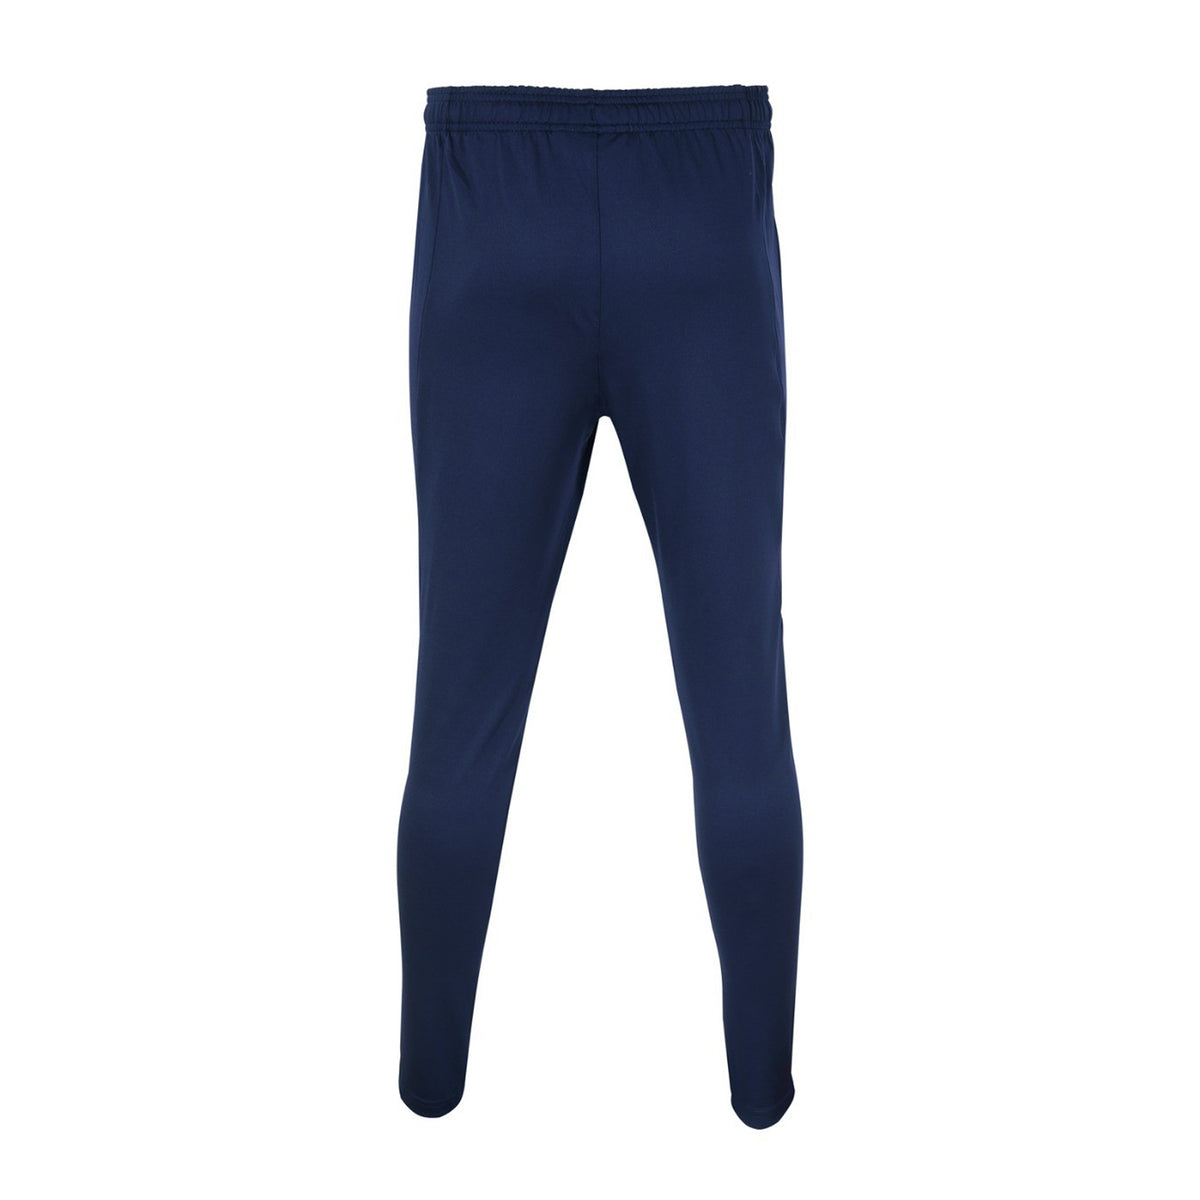 Under Armour Youth Challenger Training Pants: Navy Blue